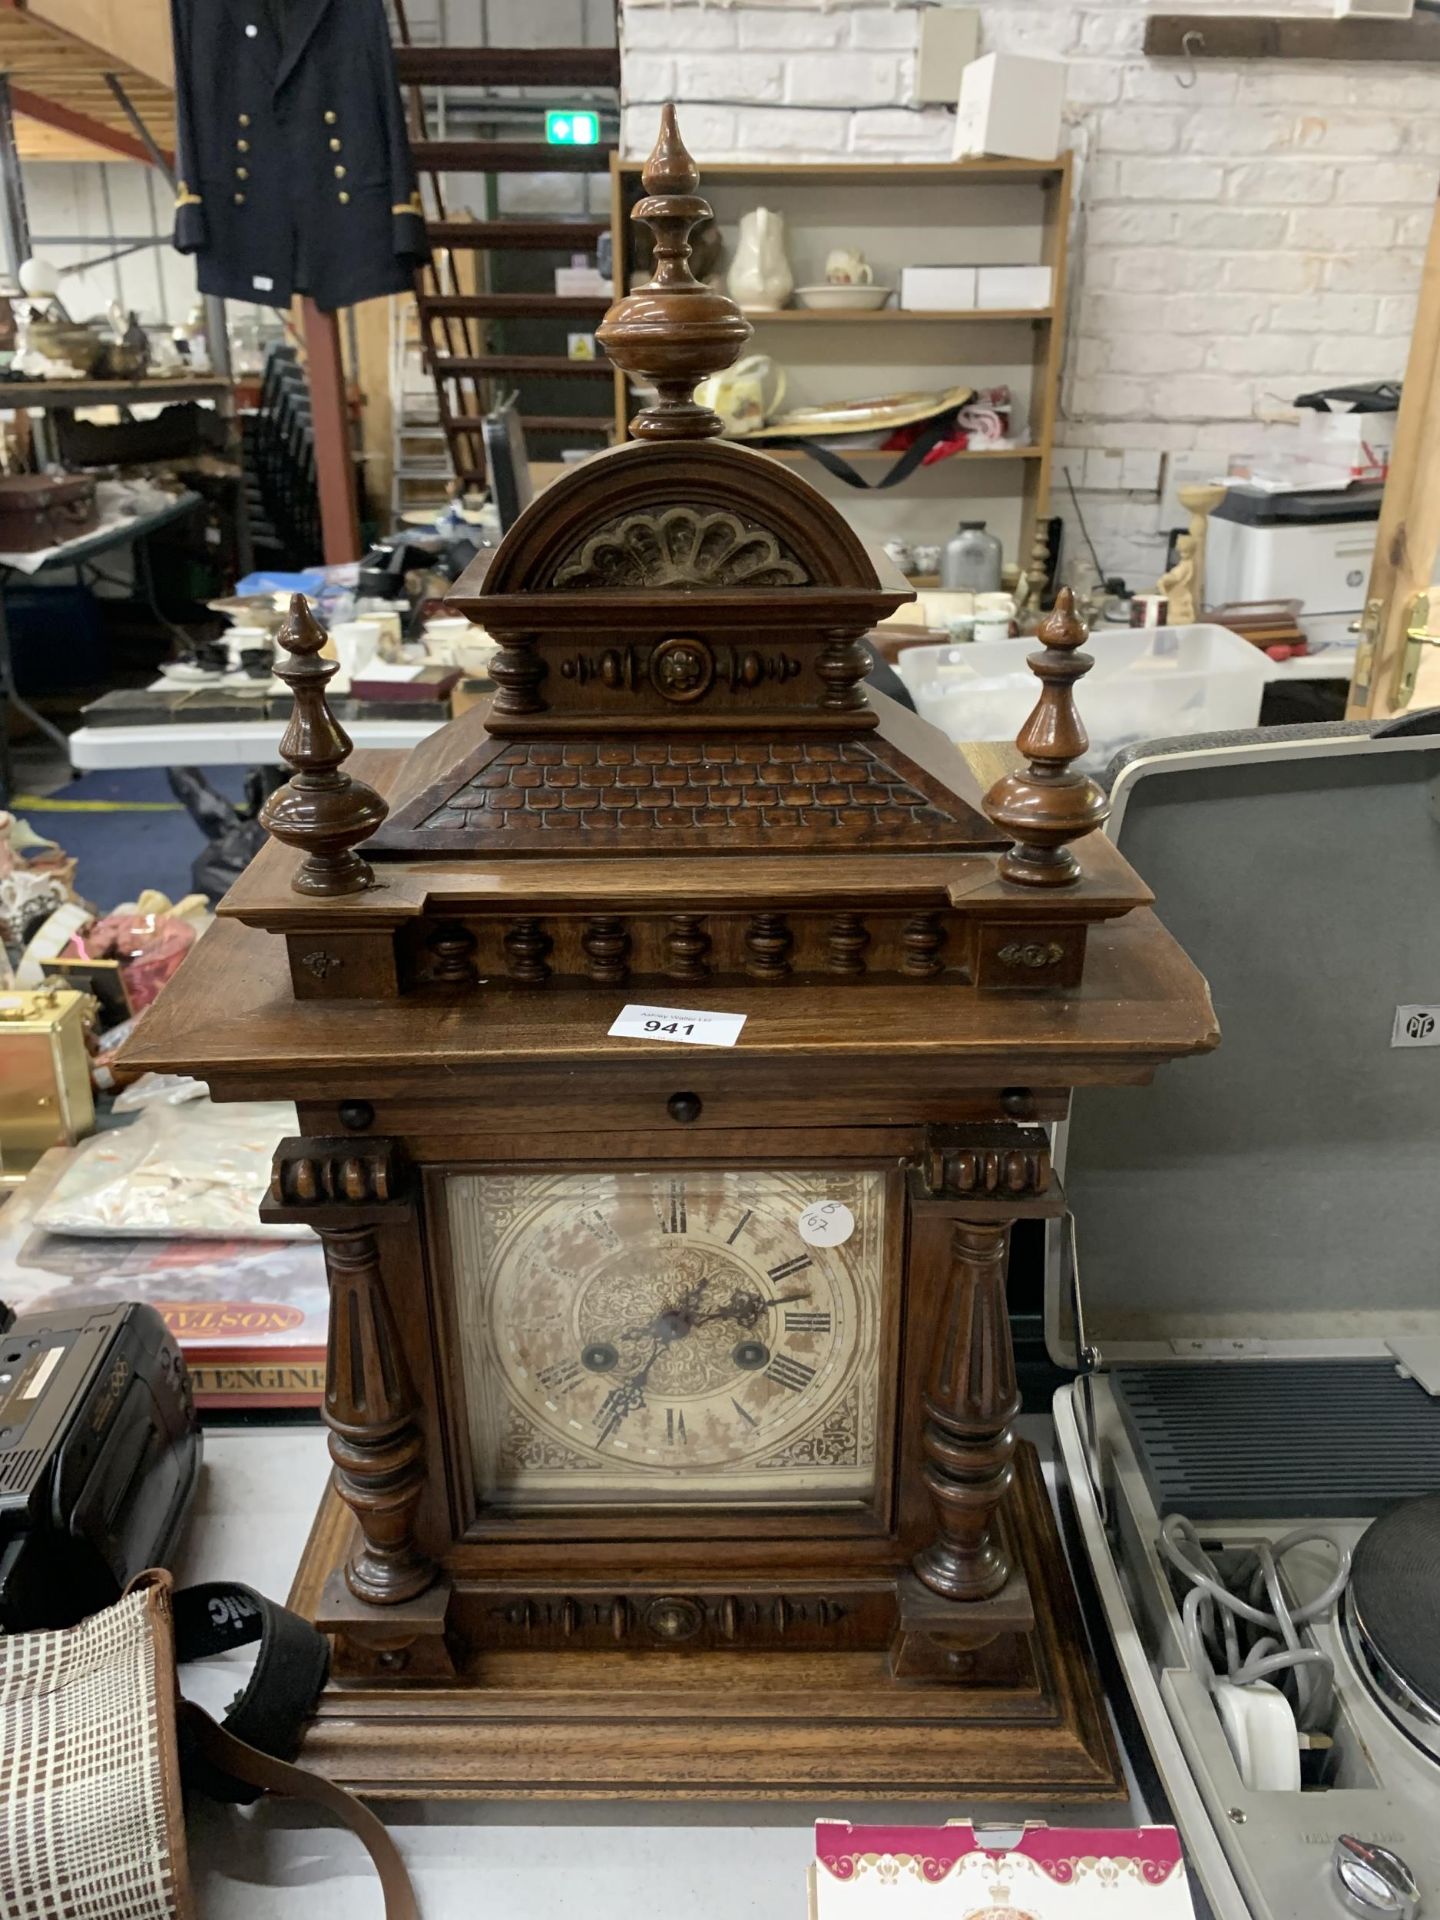 A LARGE MAHOGANY CASED MANTLE CLOCK WITH COLUMN CARVING, IN NEED OF RESTORATION